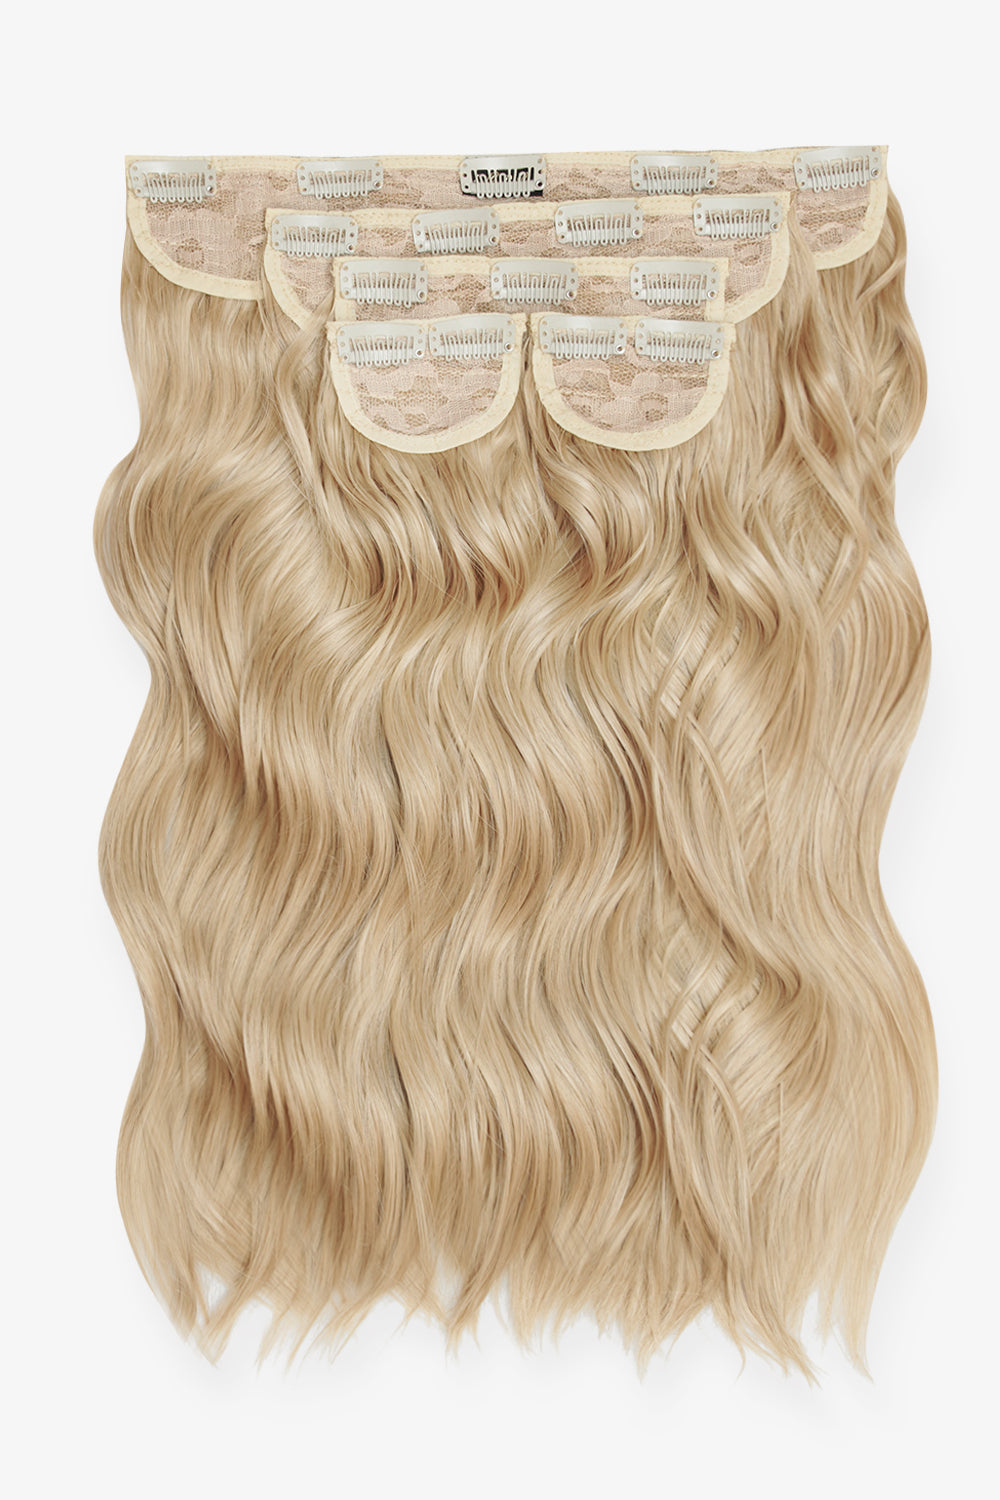 Super Thick 16’’ 5 Piece Brushed Out Wave Clip In Hair Extensions + Hair Care Bundle - California Blonde